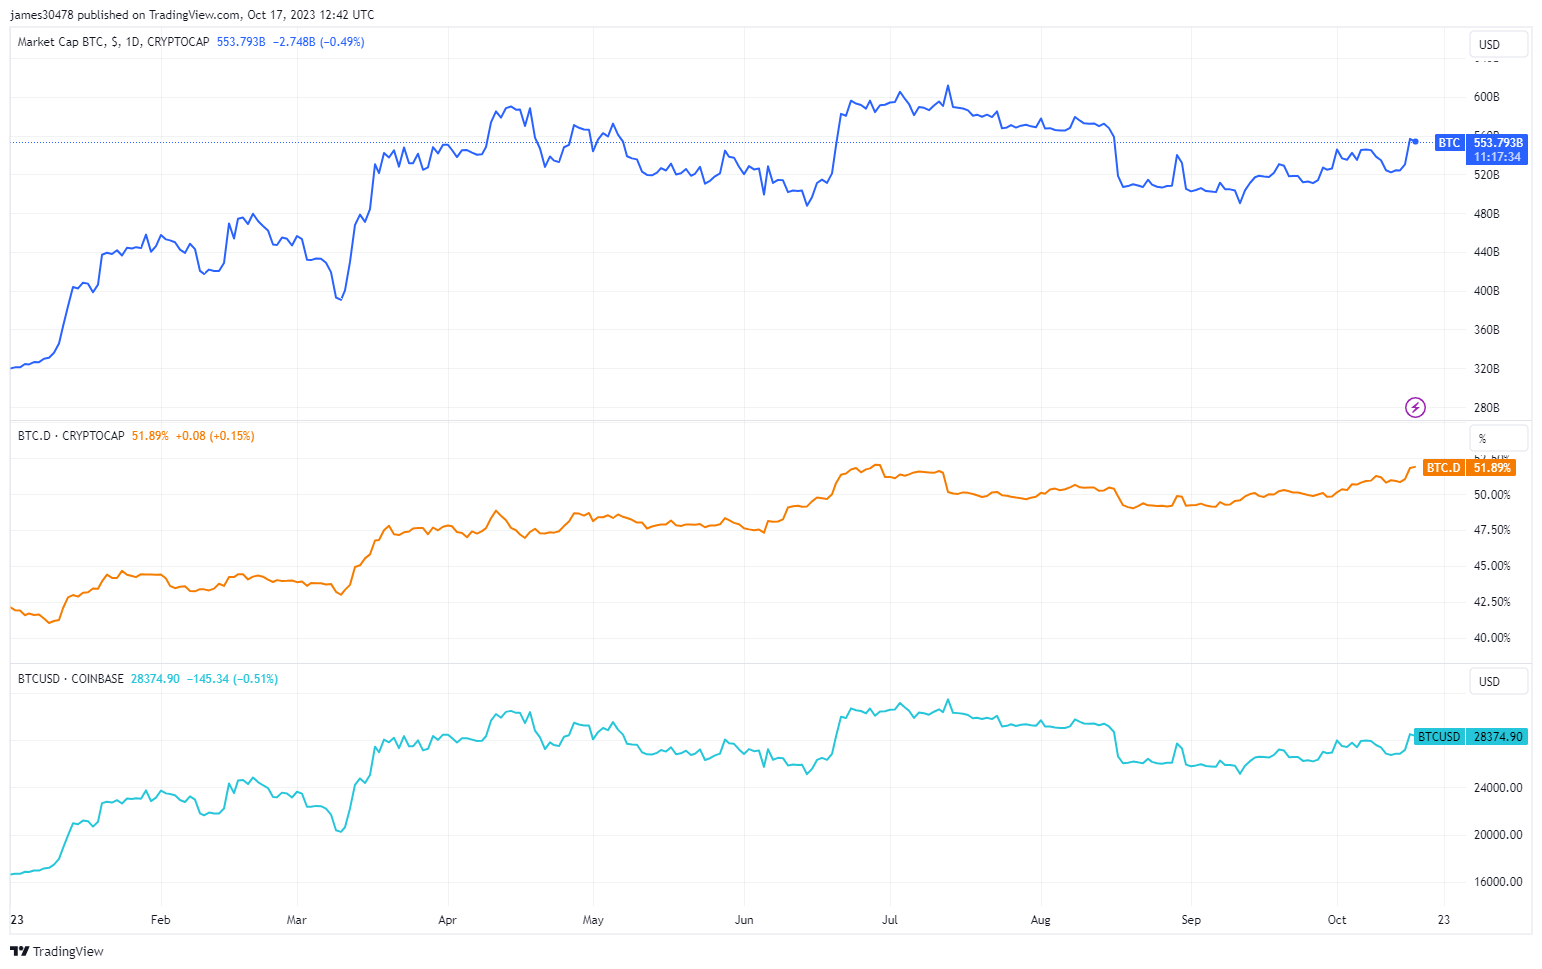 BTC Market Cap, Dominance and Price: (Source: Trading View)